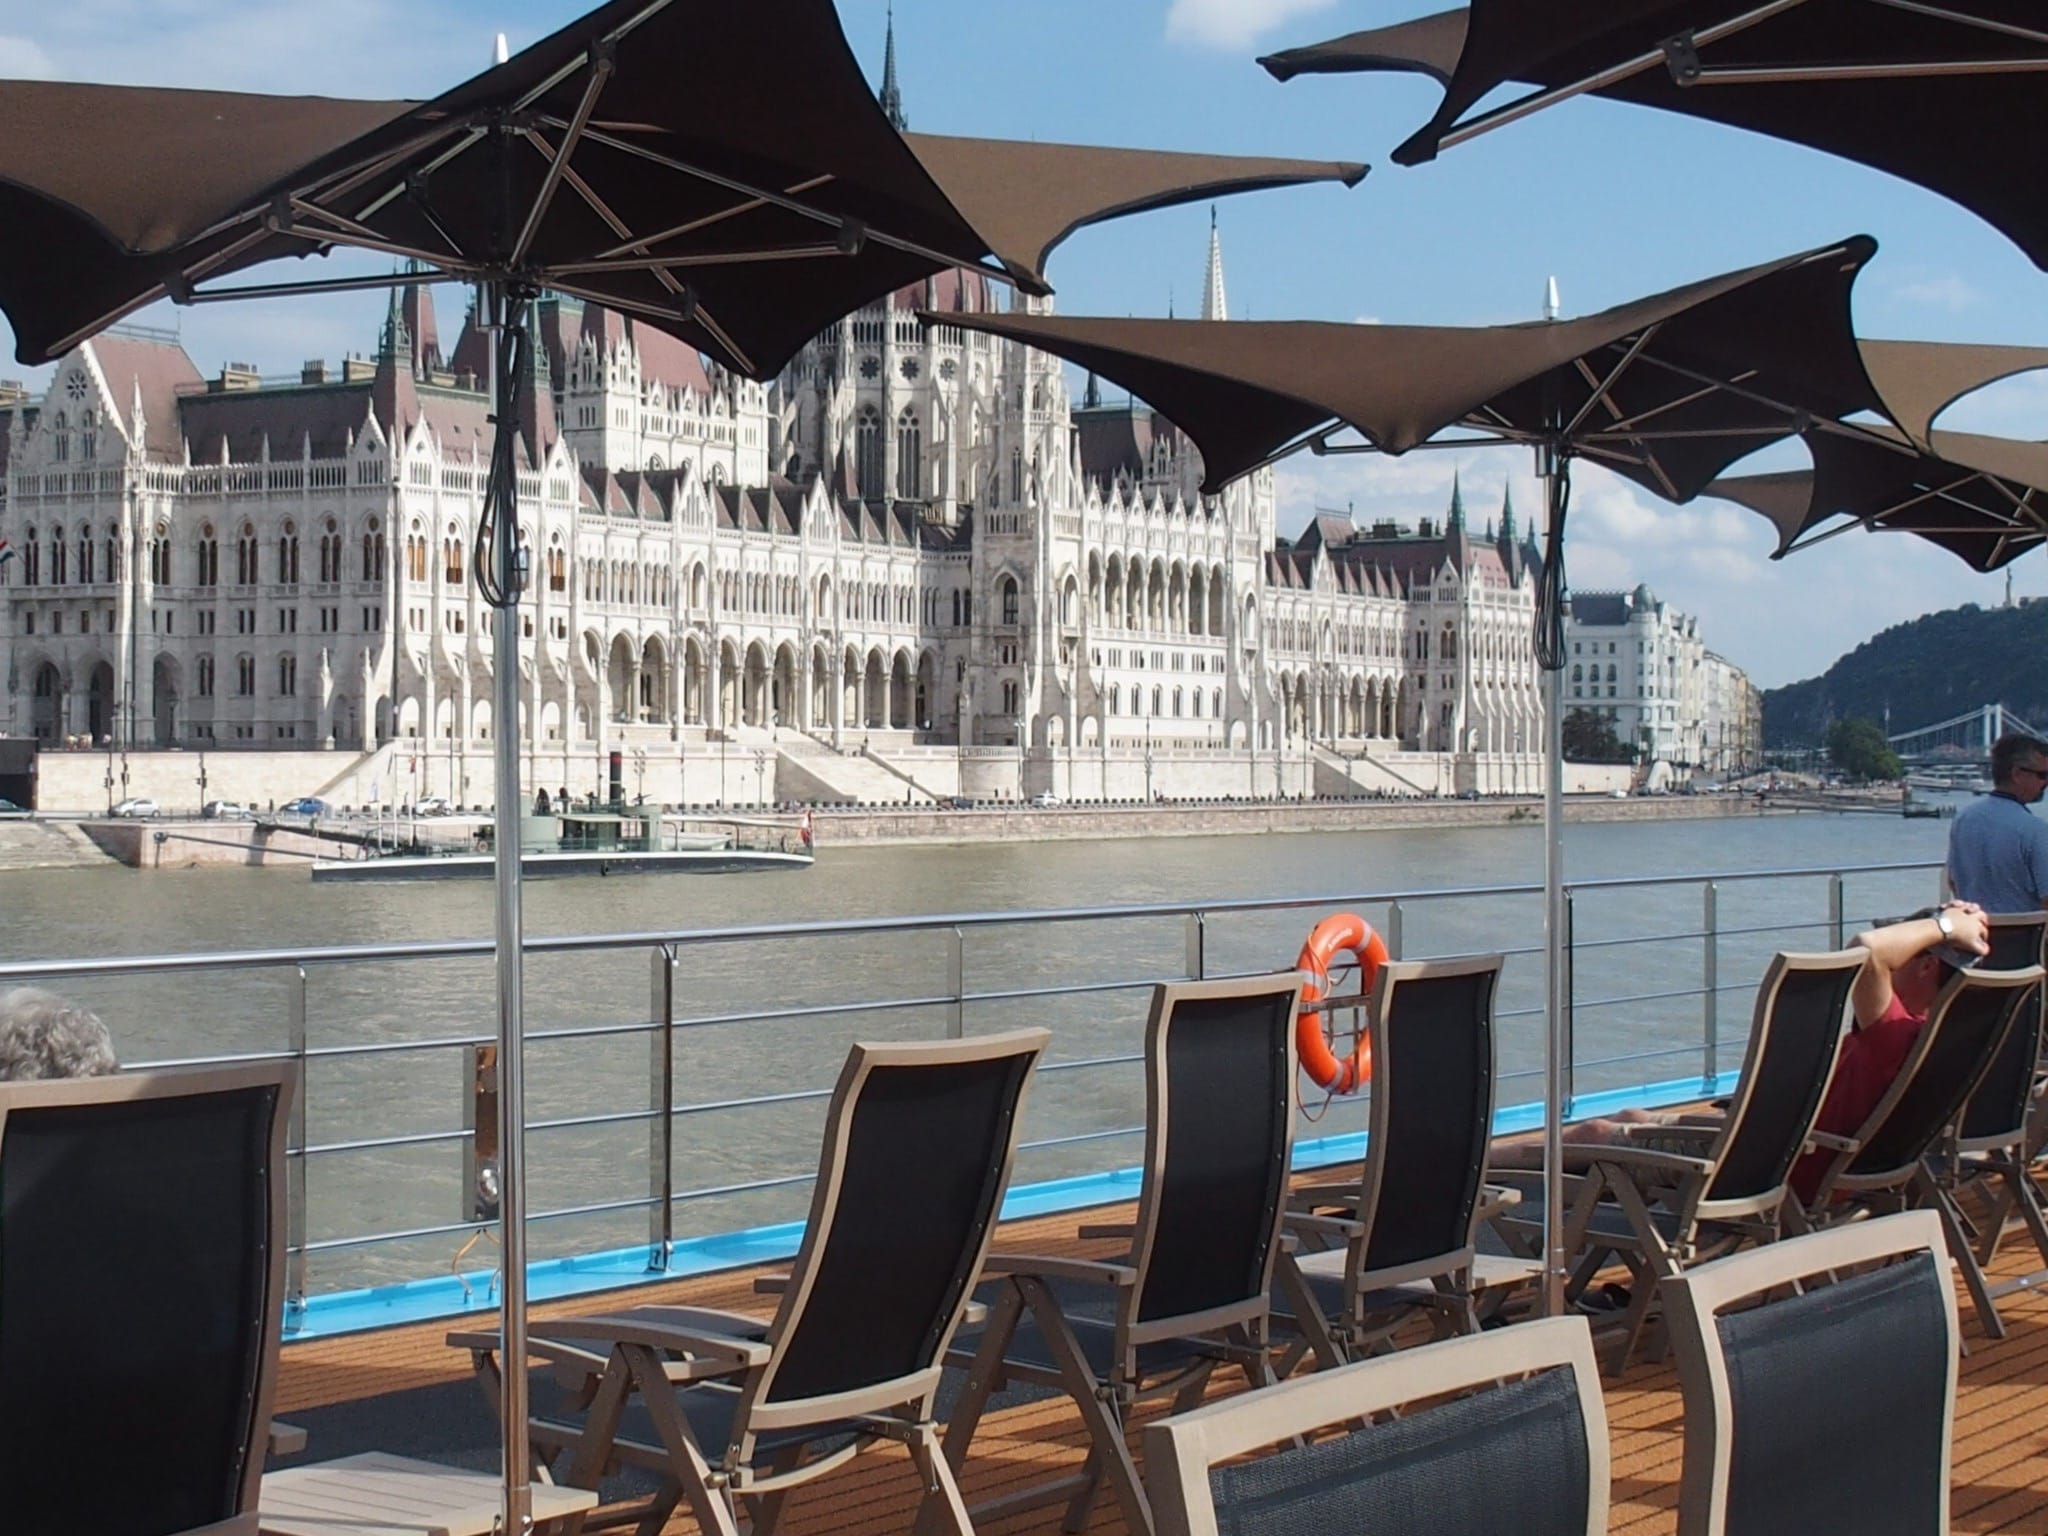 Family River Cruise on the Danube